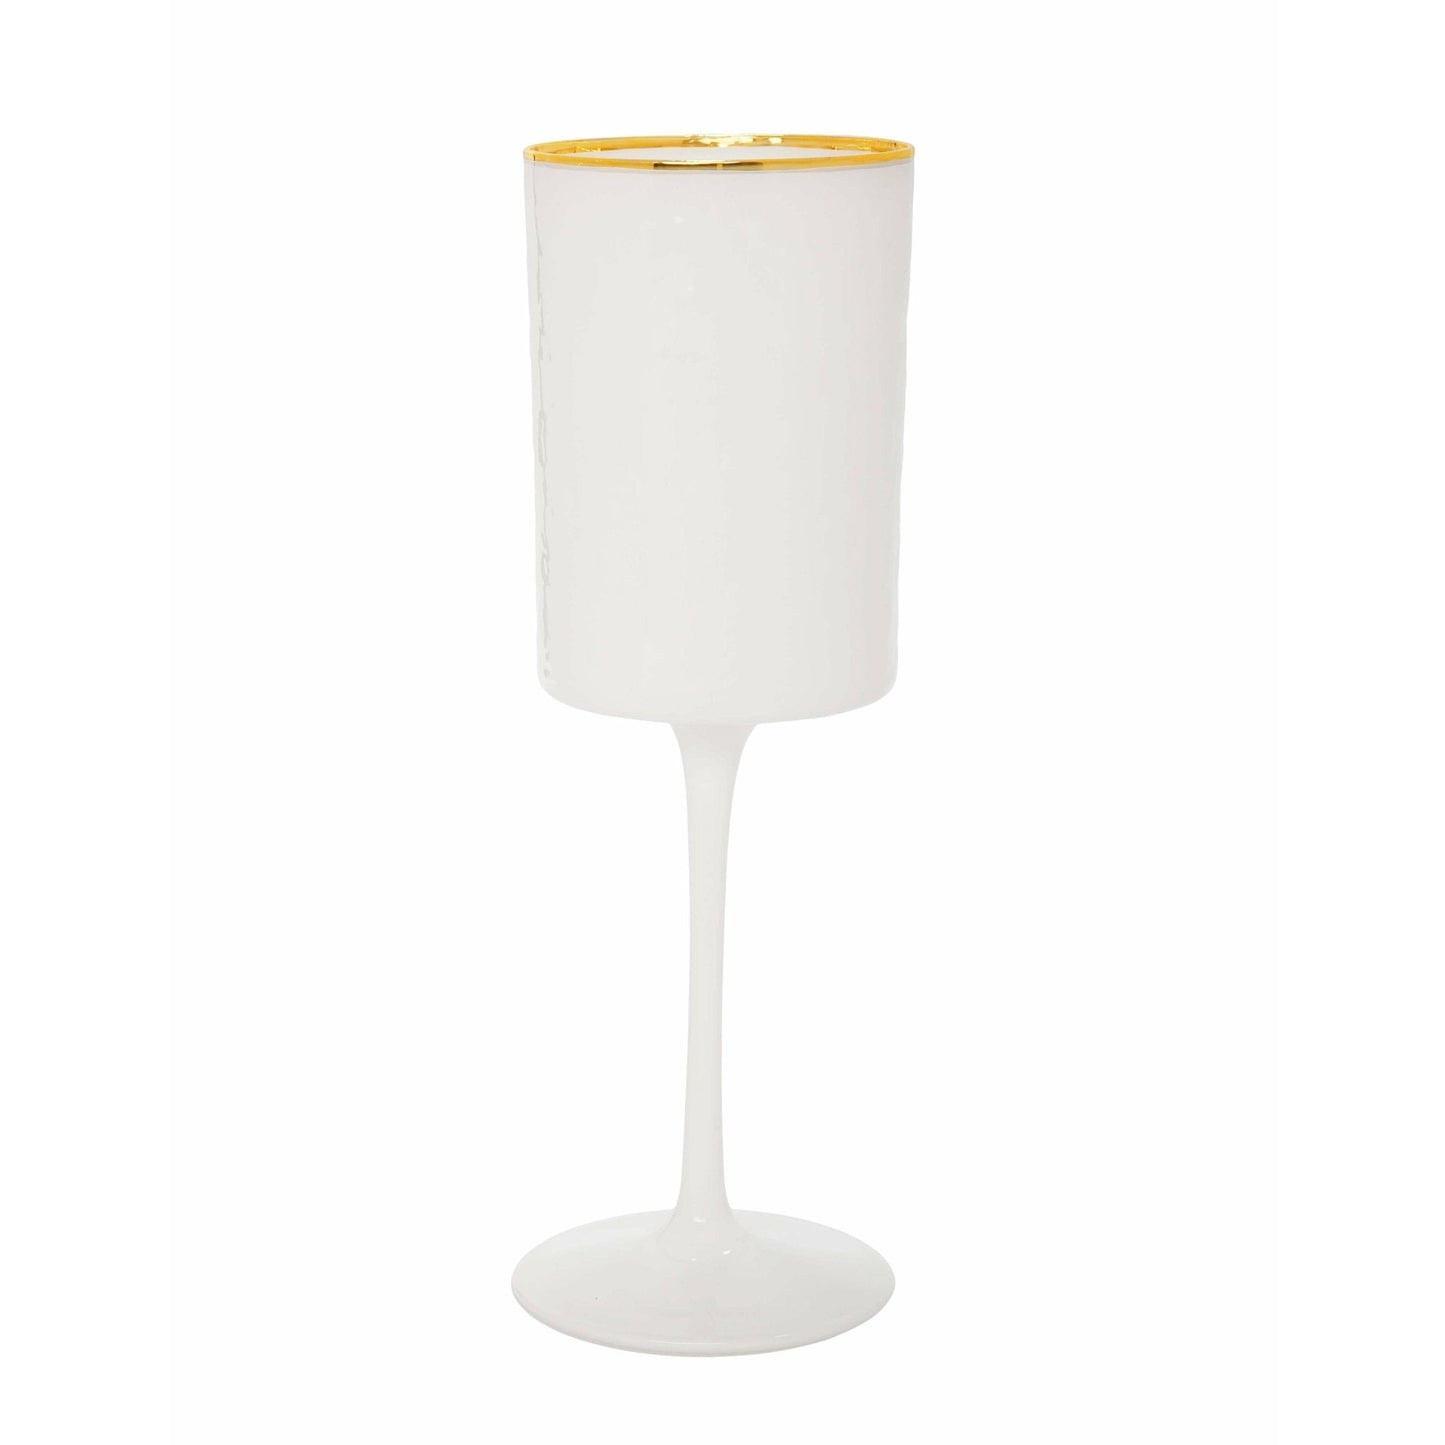 Set of 6 White Square Shaped Wine Glasses with Gold Rim - Curated Home Decor